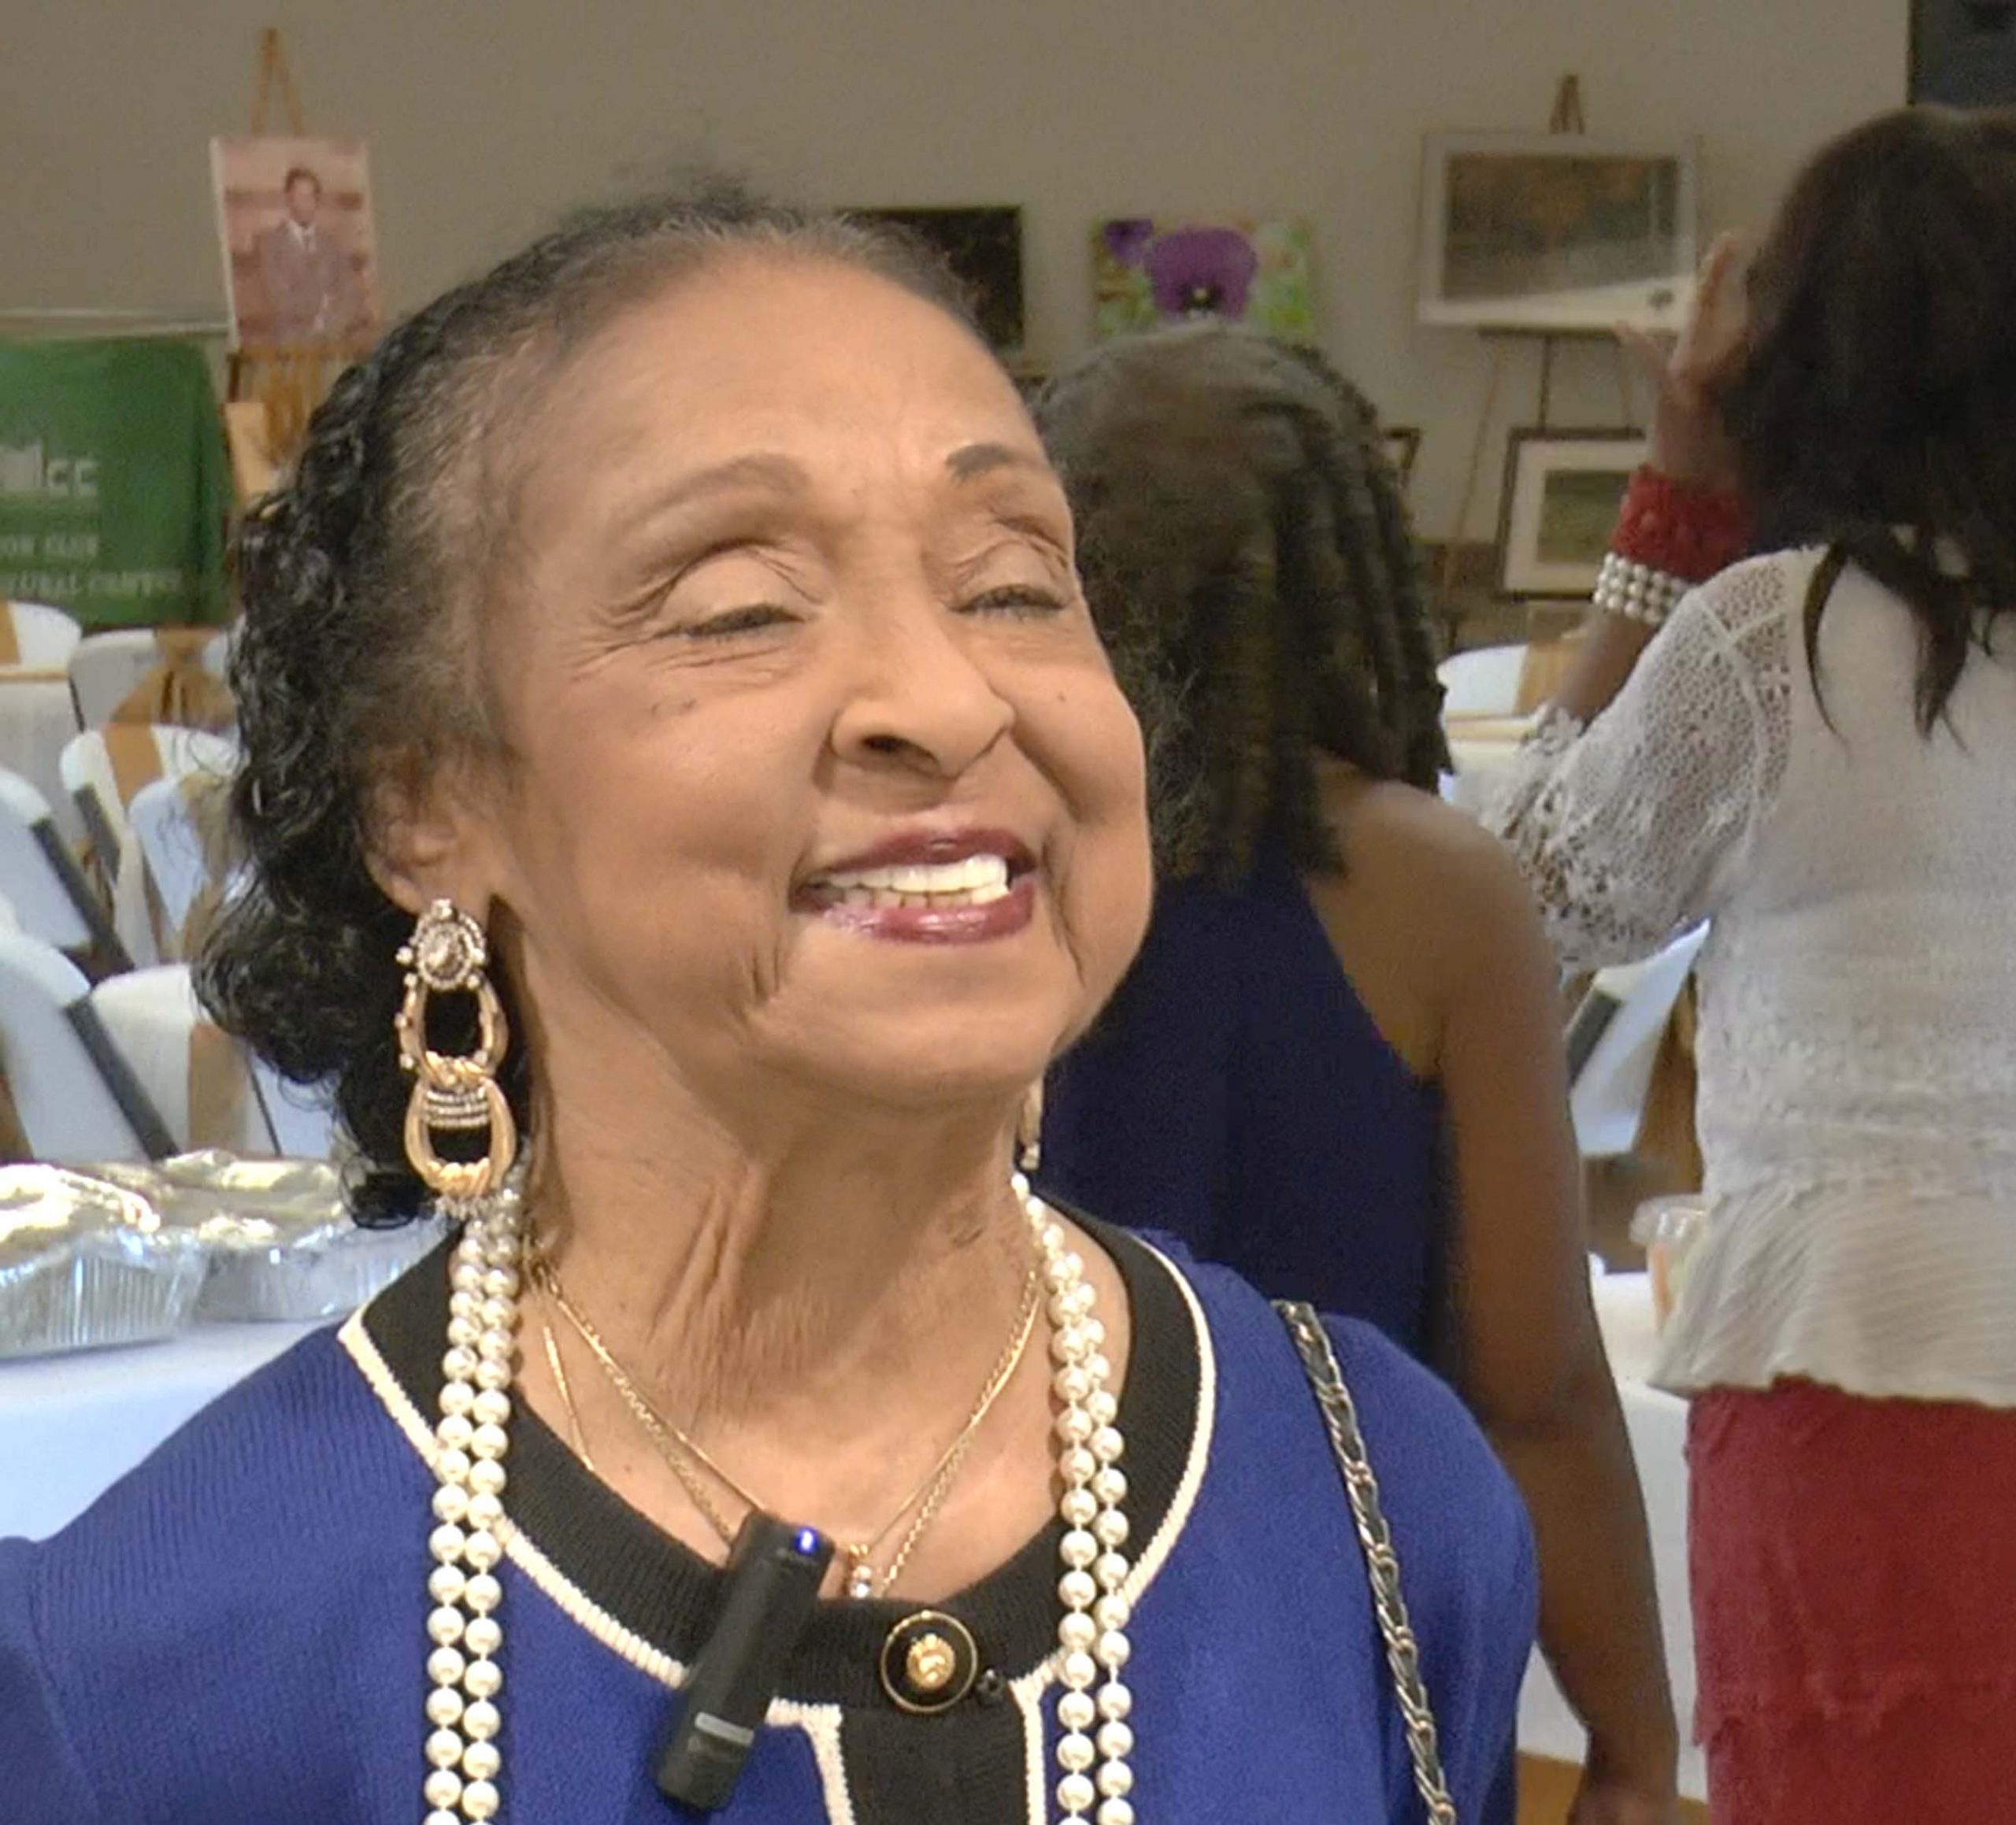 Mrs. Banks wears earrings, pearls, and a blue shirt with black trim. She is smiling, looking up and to the right of the camera.